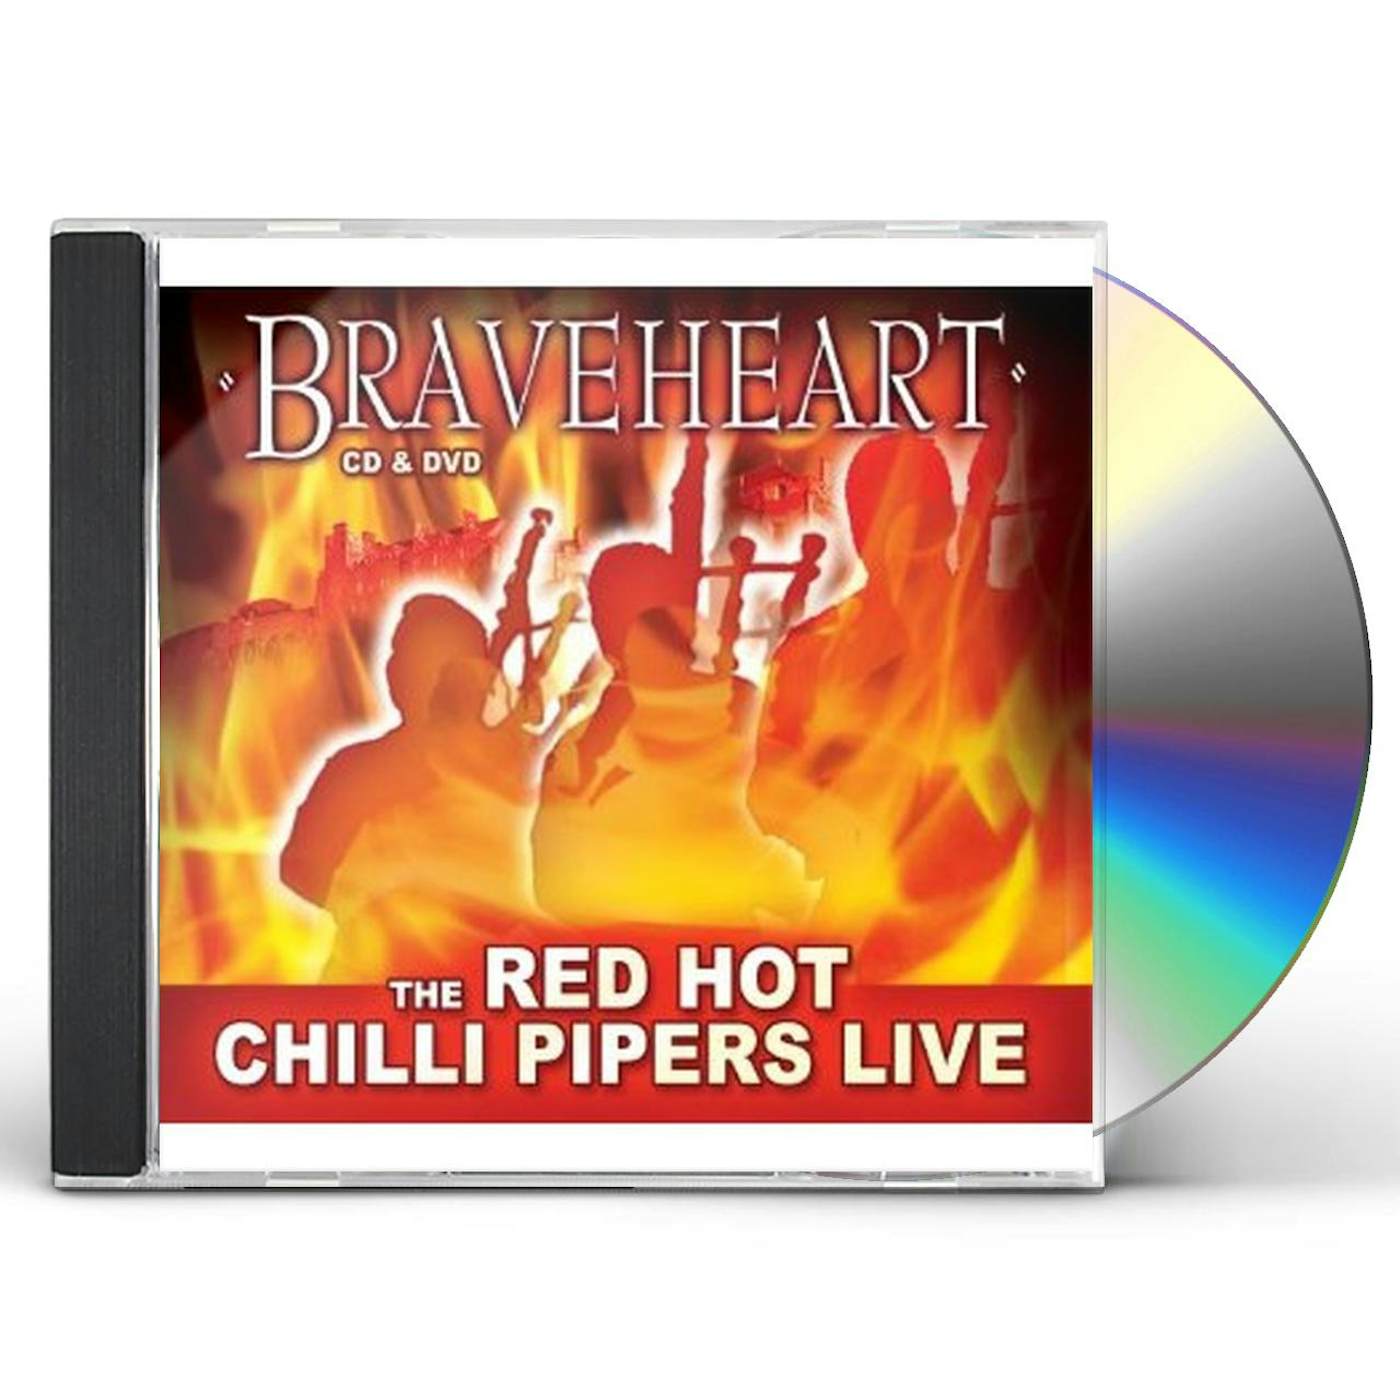 Red Hot Chilli Pipers CD